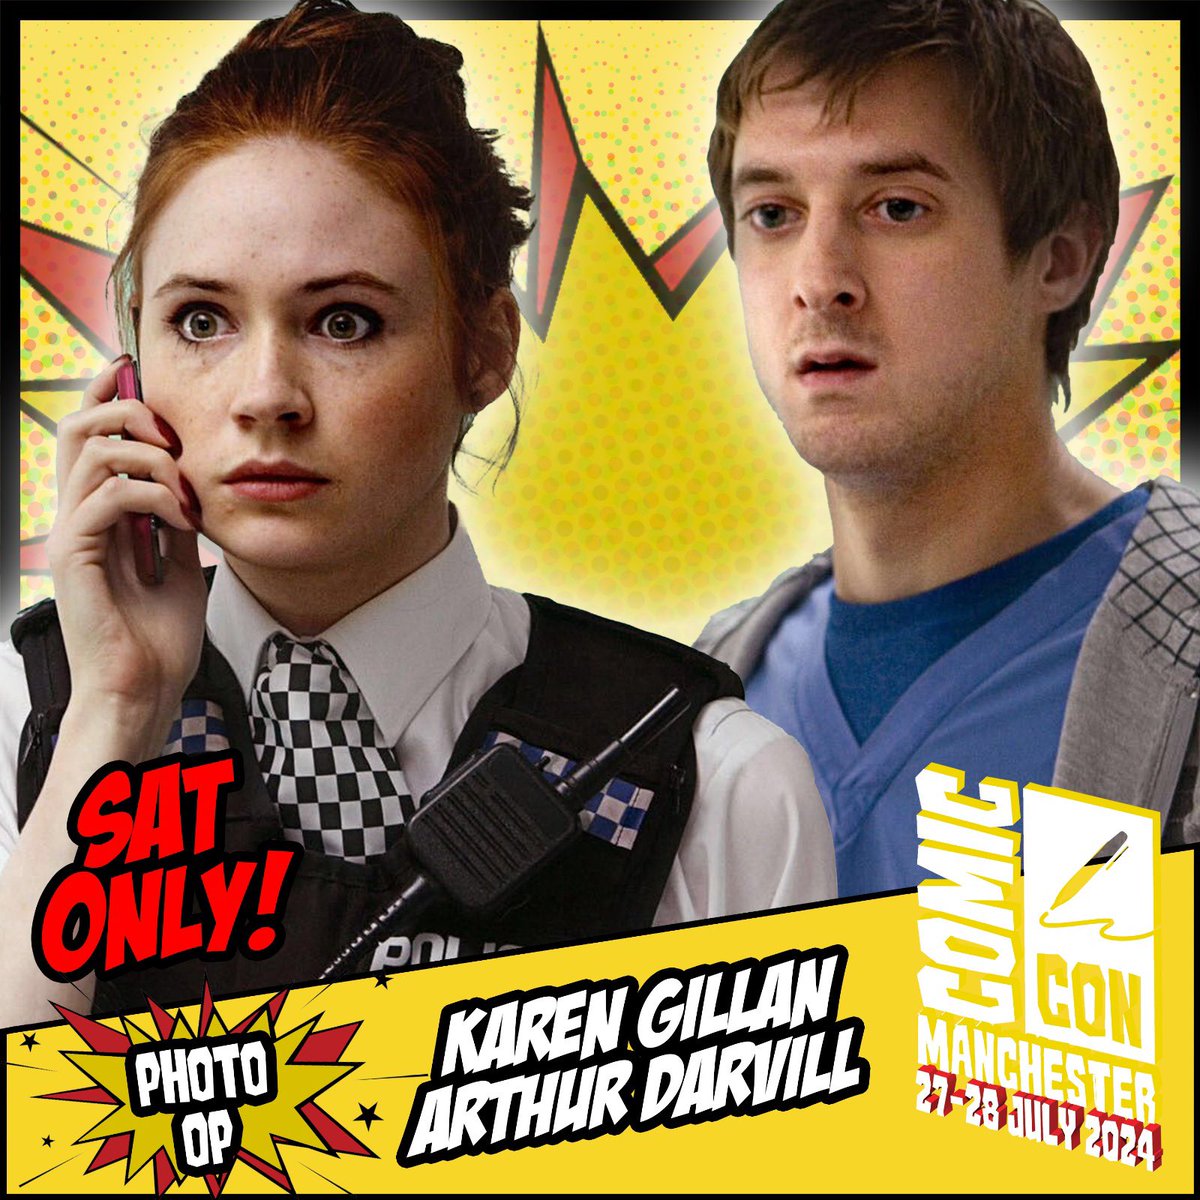 DR WHO DUO PHOTO Comic Con Manchester presents a duo photograph opportunity with Karen and Arthur. Please note, this opportunity is Saturday only! Tickets: comicconventionmanchester.co.uk